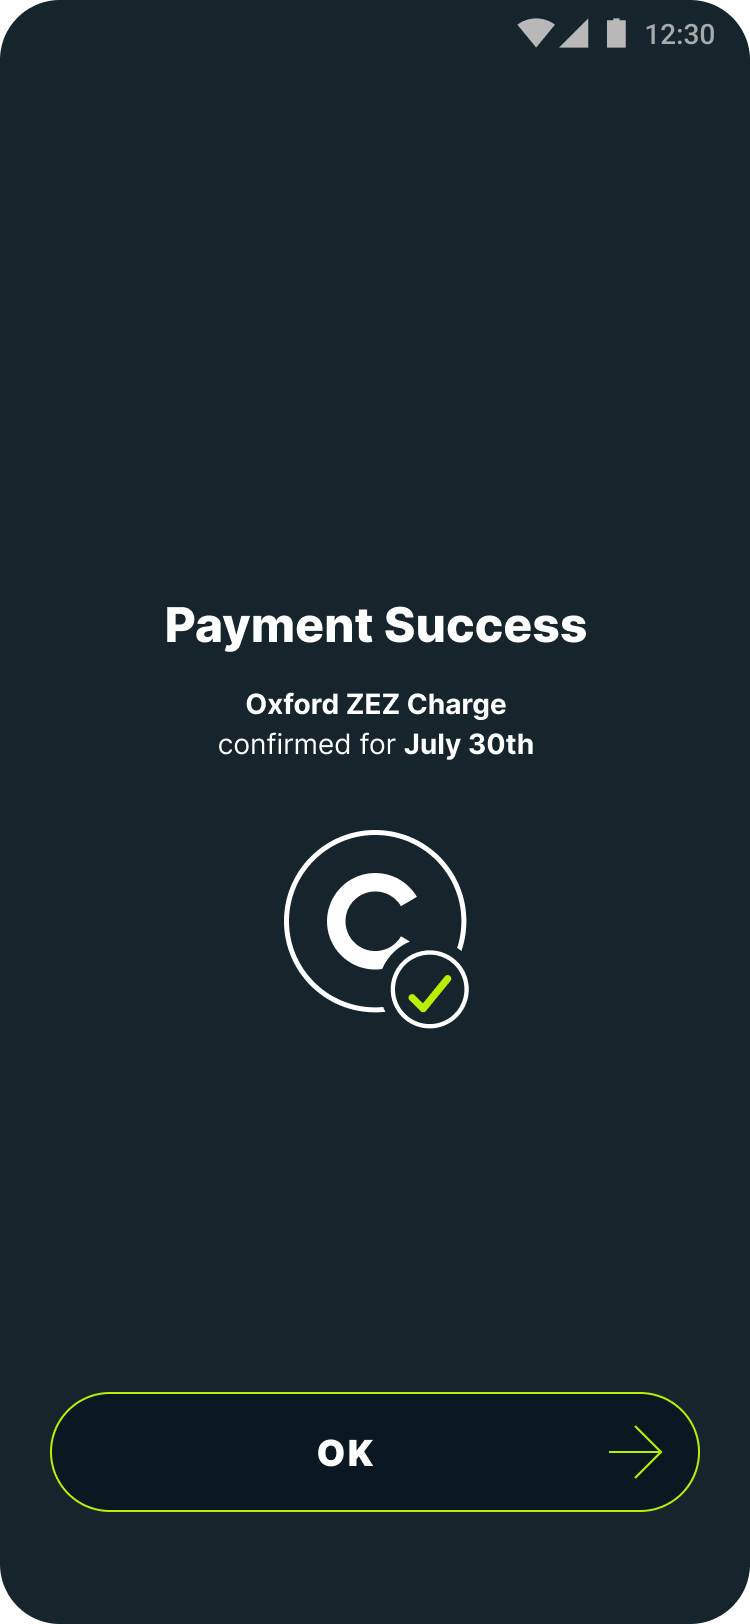 payment success screen for Clean Air Charge